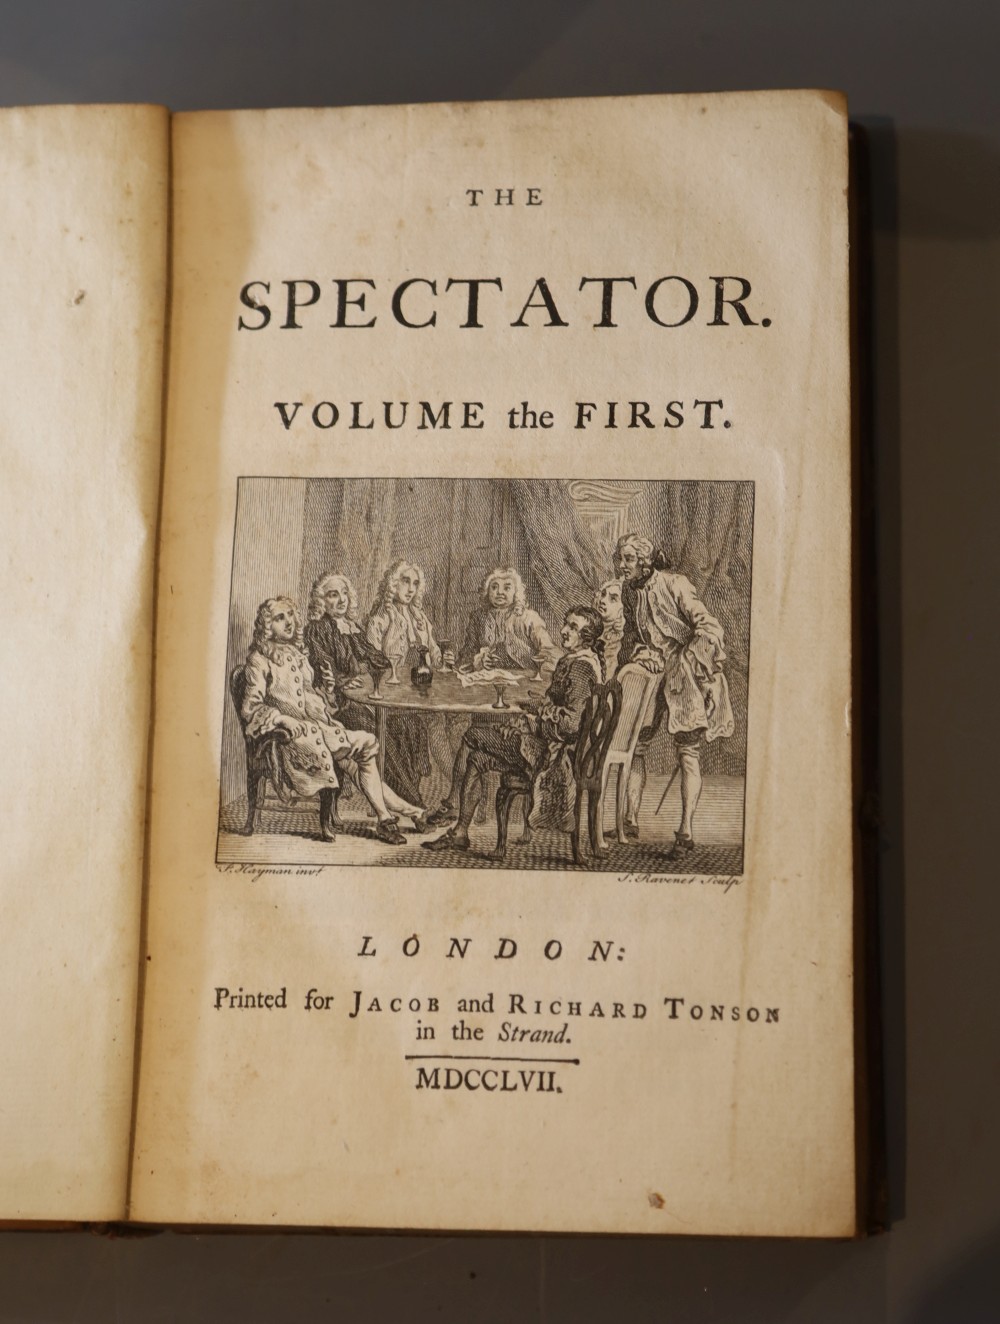 Spectator - The Spectator [By Addison, Steele and others], 8 vols, 8vo, calf, front board to vol. I detached, loss to some titling labe